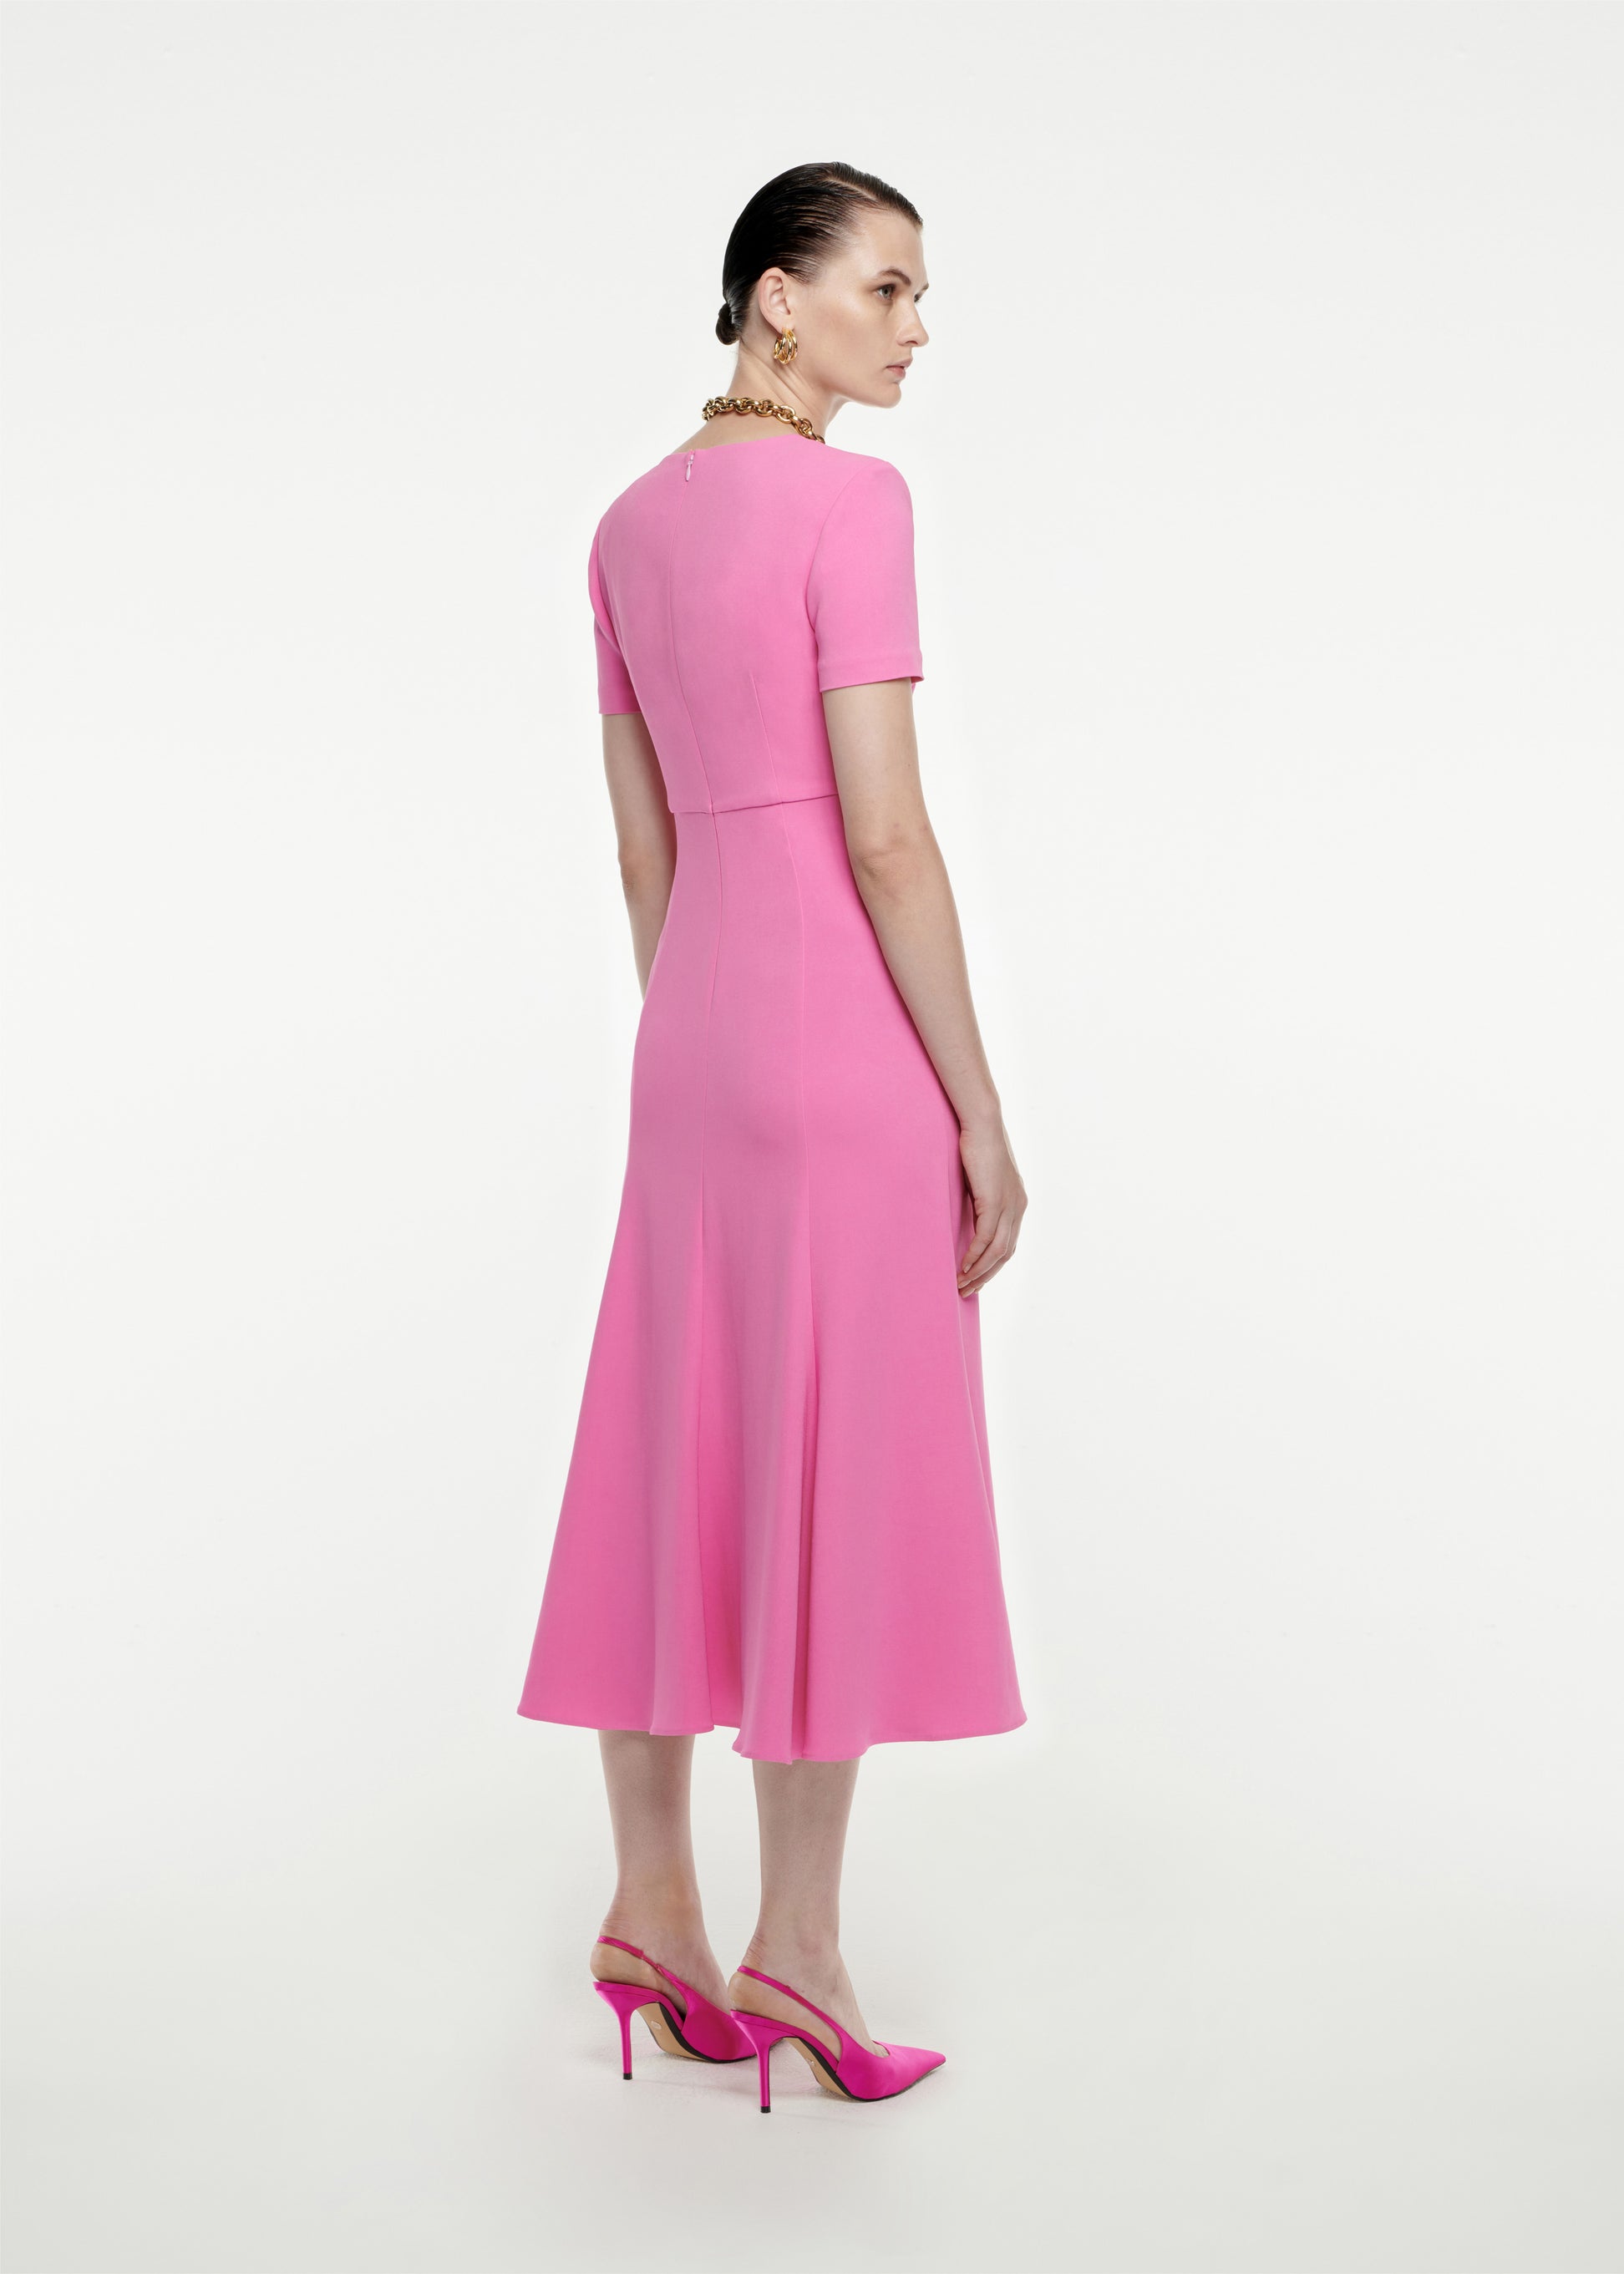 The back of a woman wearing the Short Sleeve Stretch-Cady Midi Dress in Pink